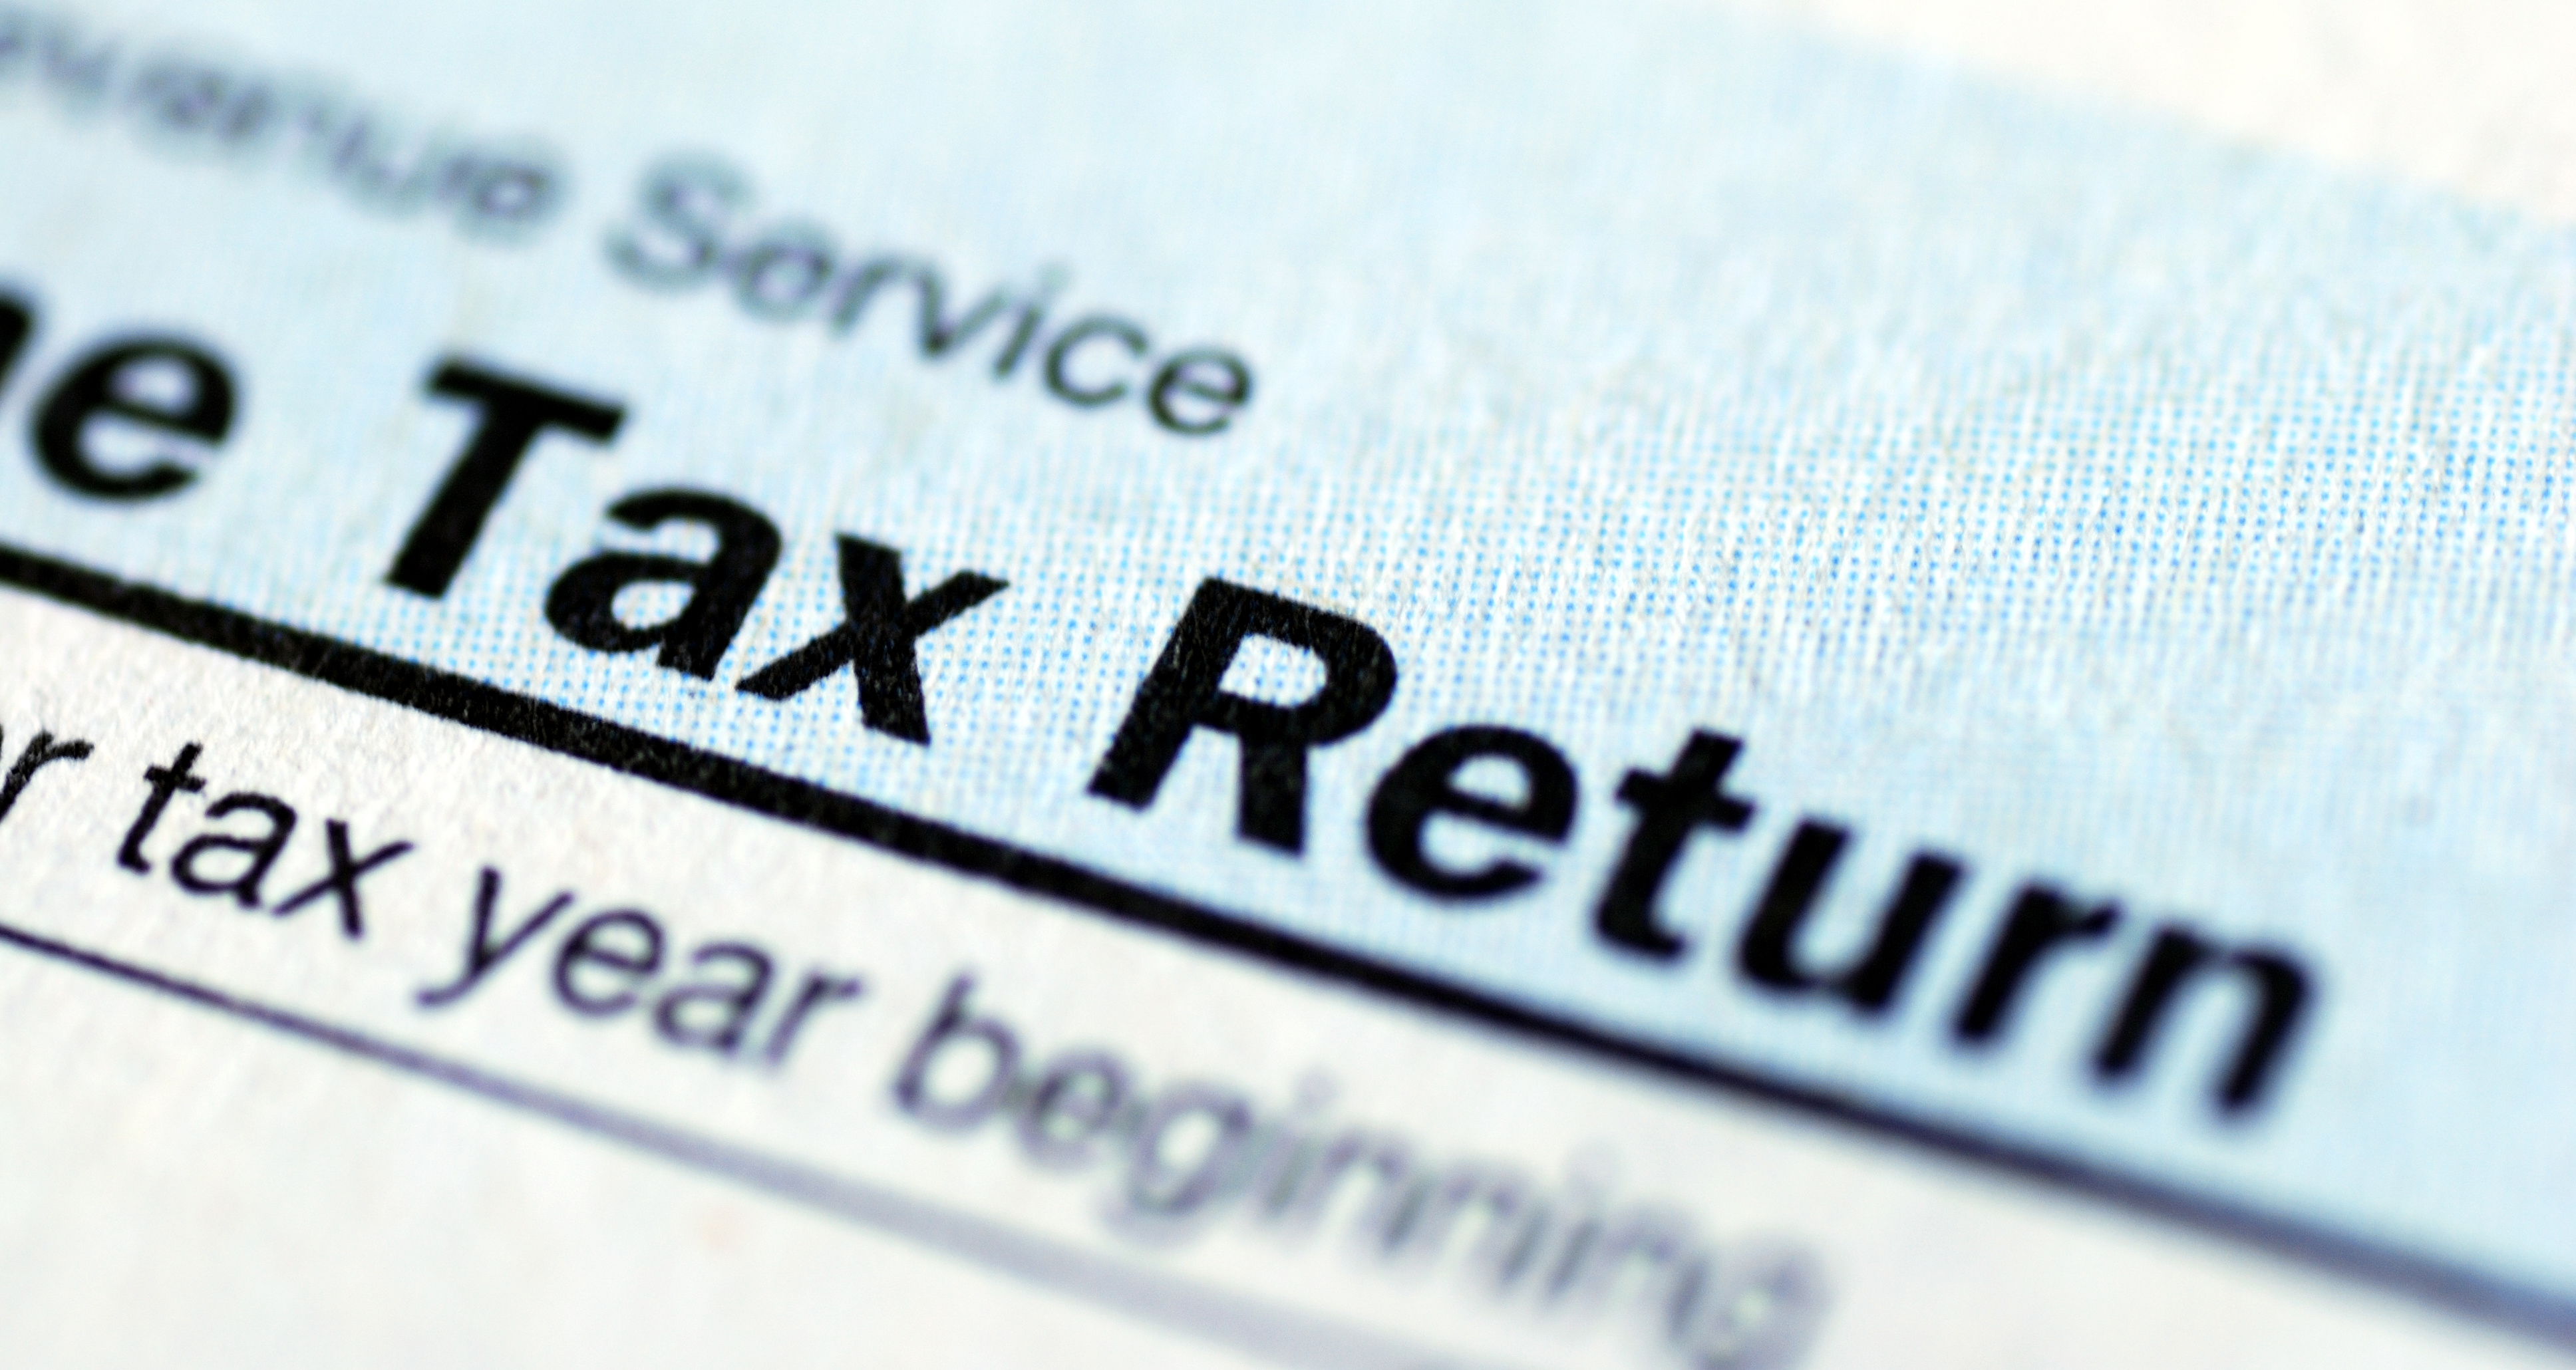 The final tax return filing deadline is approaching fast… - https://roomslocal.co.uk/blog/the-final-tax-return-filing-deadline-is-approaching-fast #final #return #filing #deadline #approaching